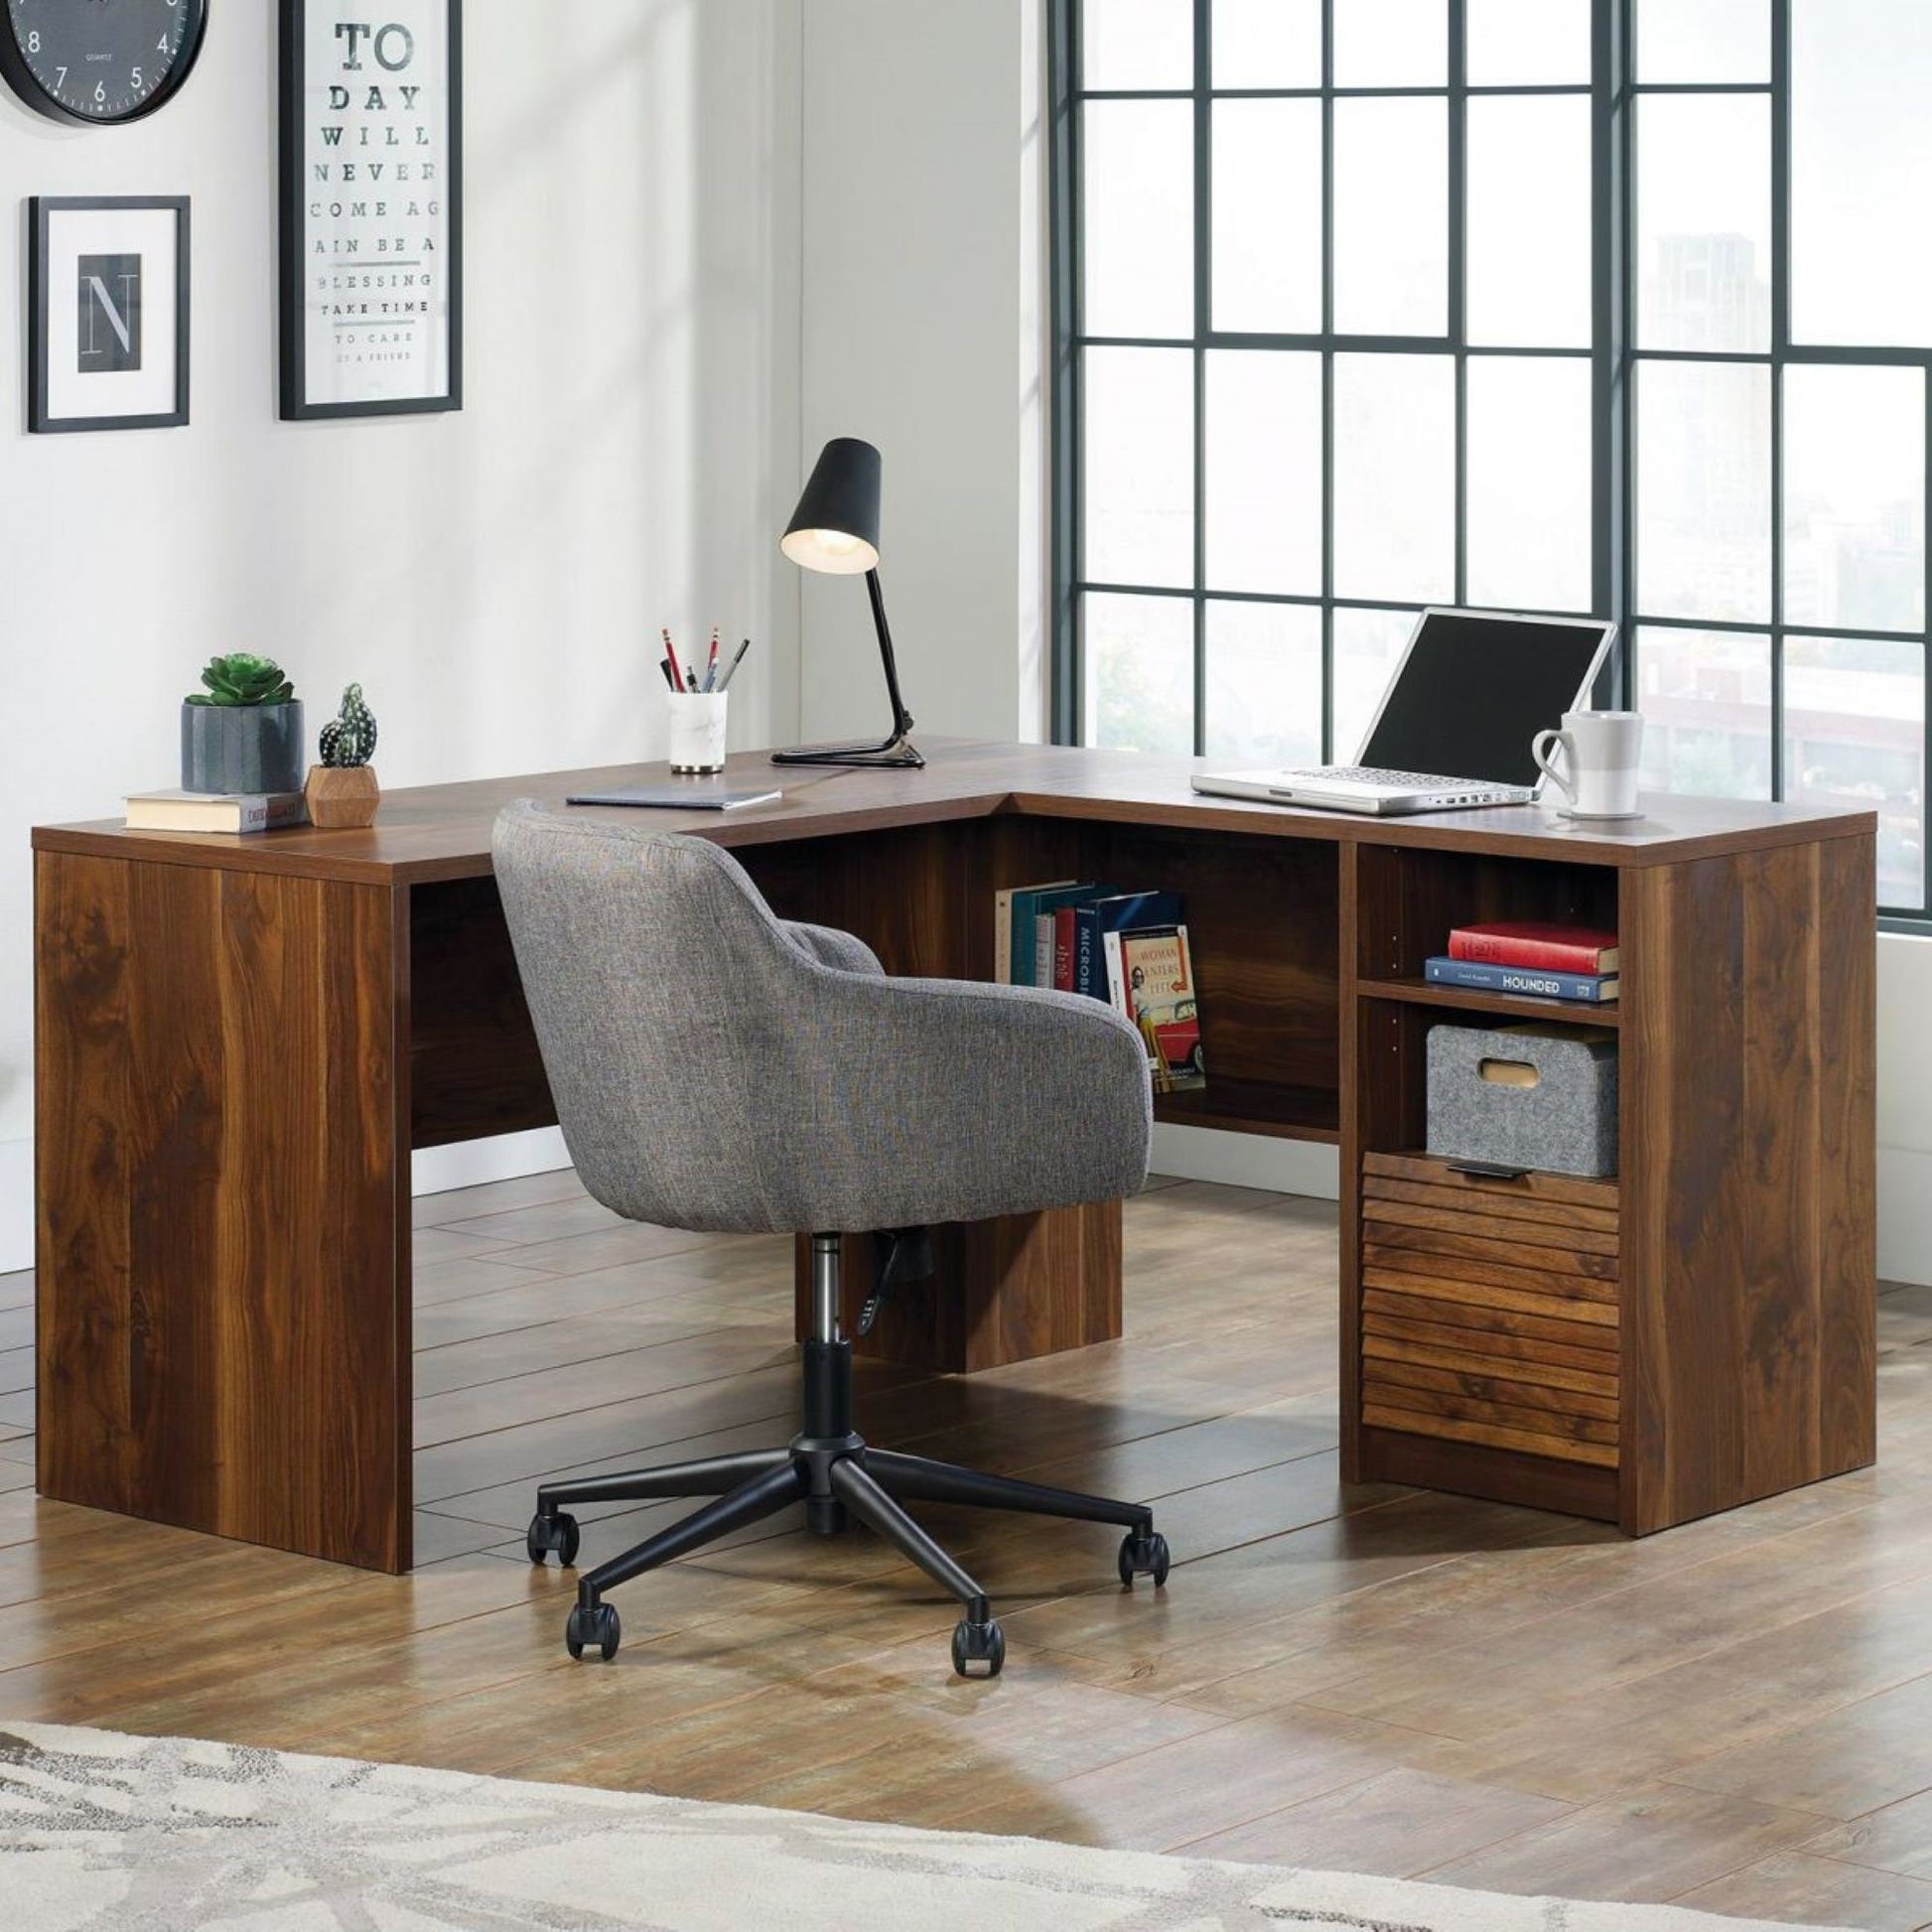 Retro / Mid Century style home office L-shaped office desk in Walnut f –  Lush Home Interiors